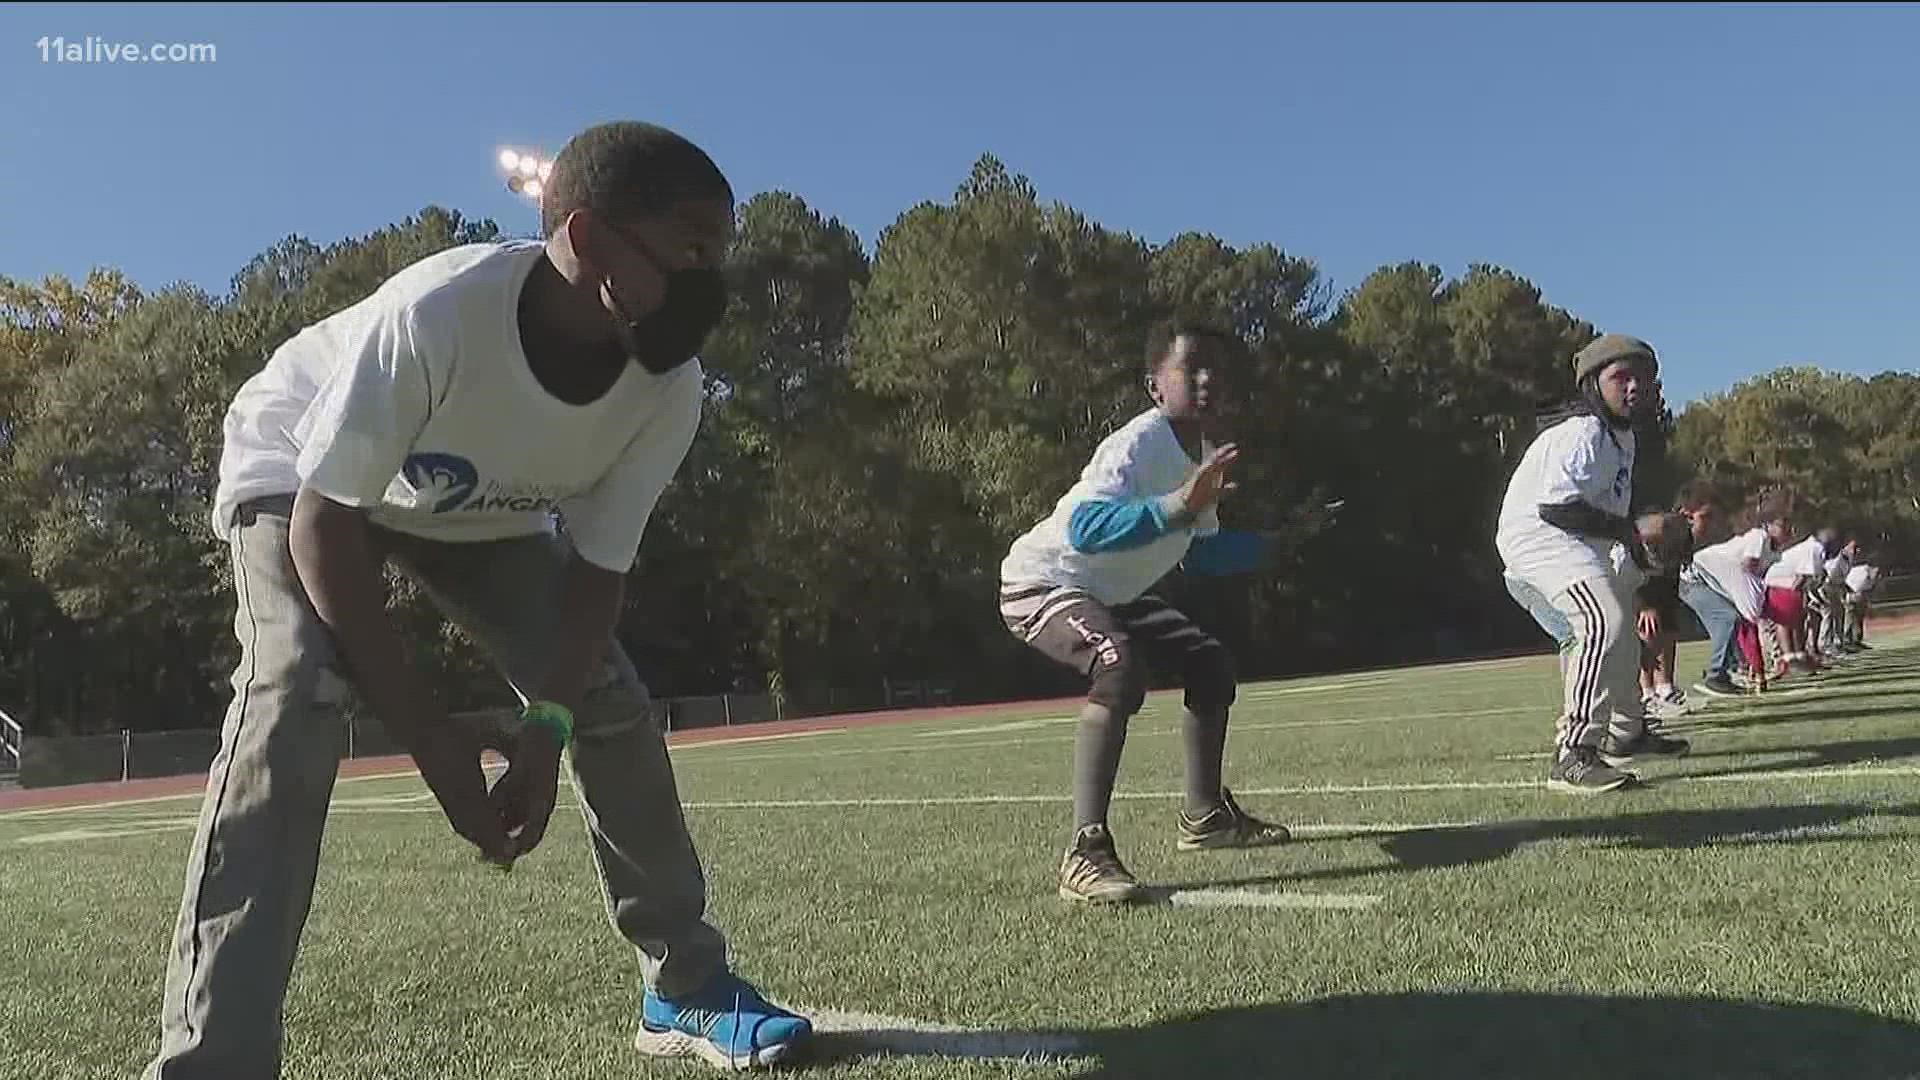 A prison fellowship is helping children by playing football.